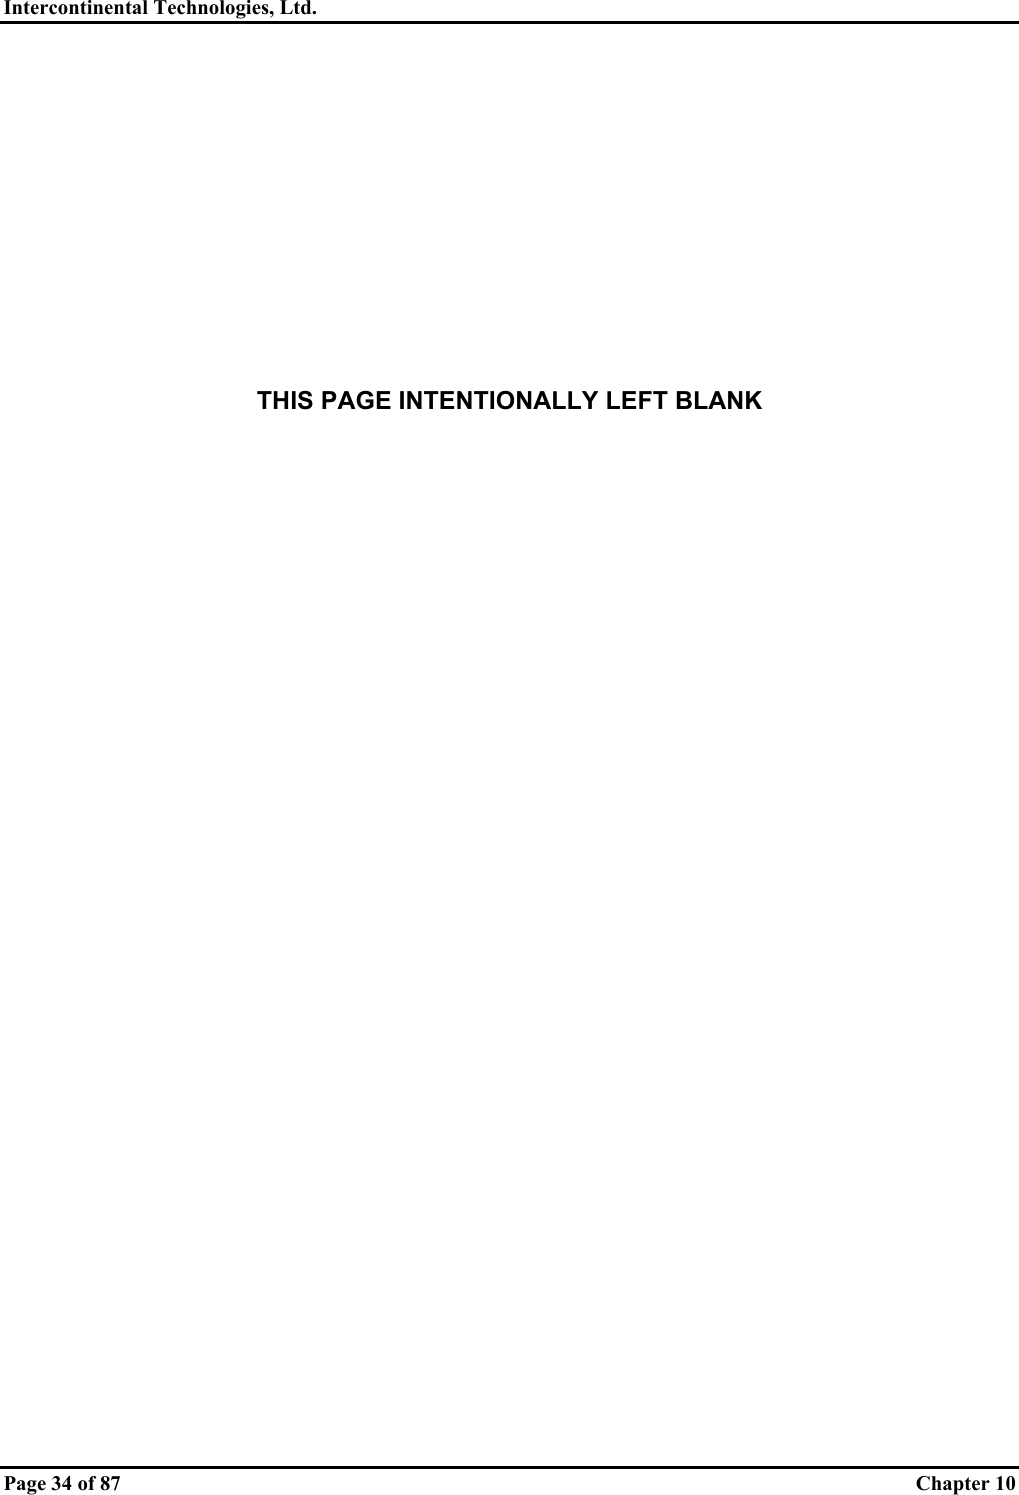 Intercontinental Technologies, Ltd.   Page 34 of 87  Chapter 10            THIS PAGE INTENTIONALLY LEFT BLANK   